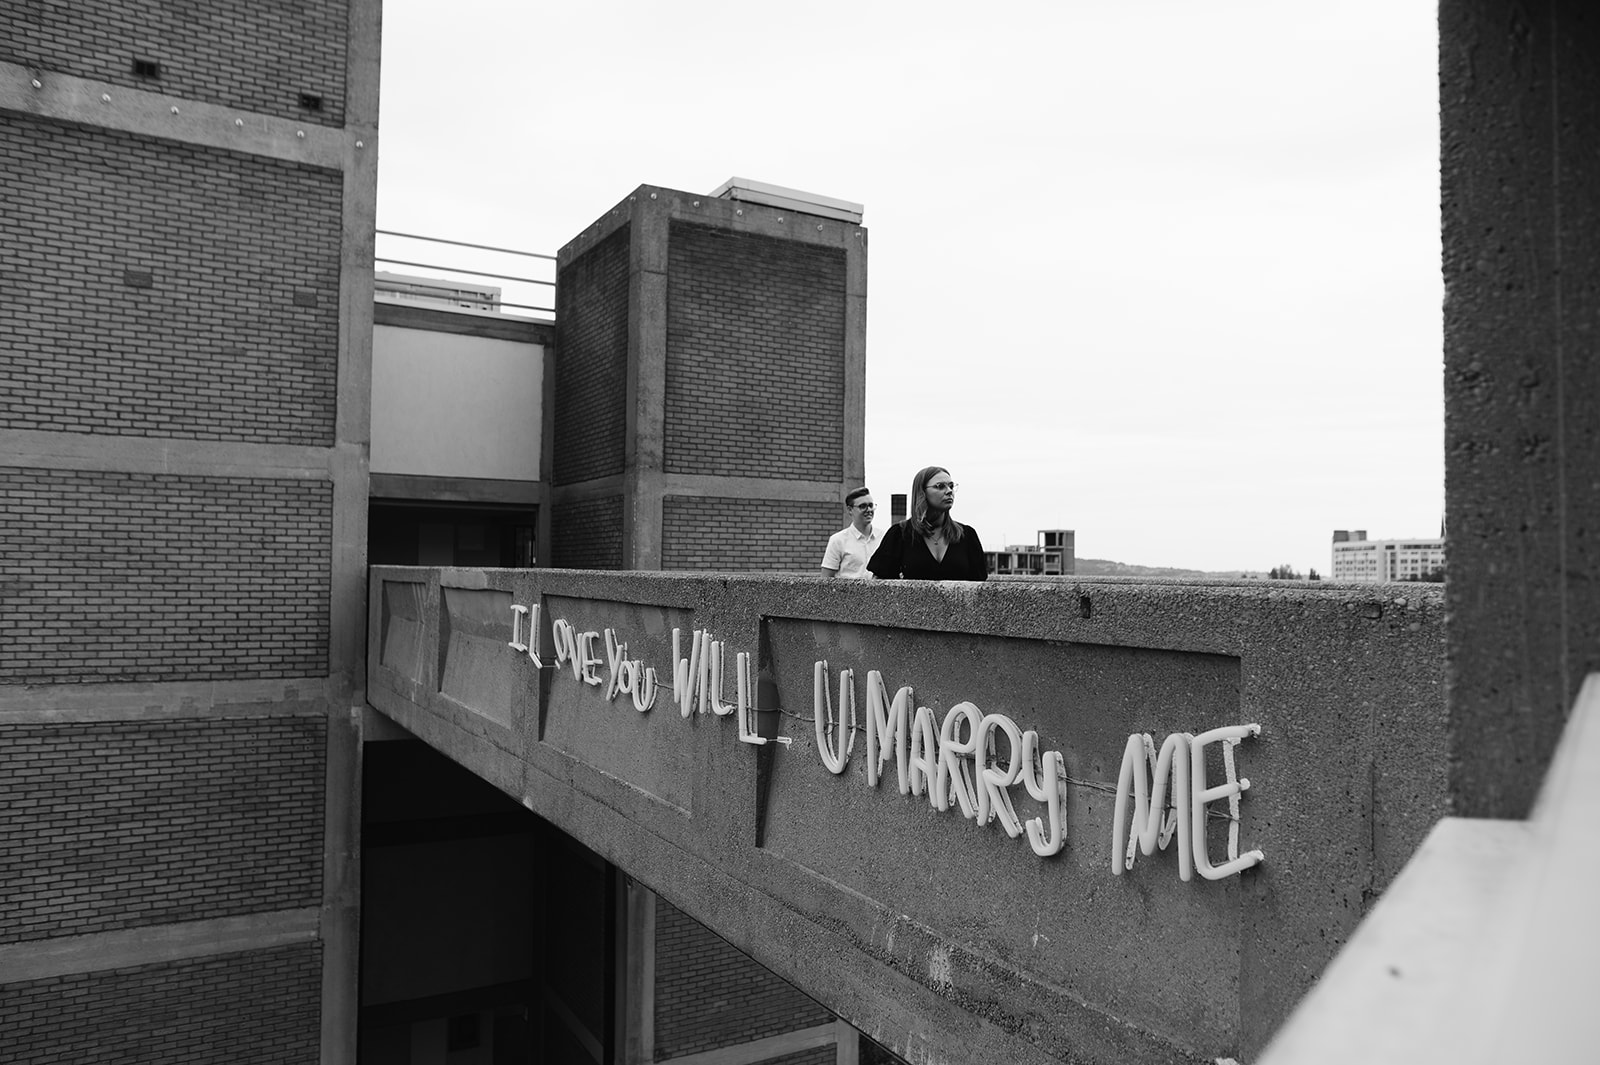 Couple on the I love you will U marry me bridge where he proposed